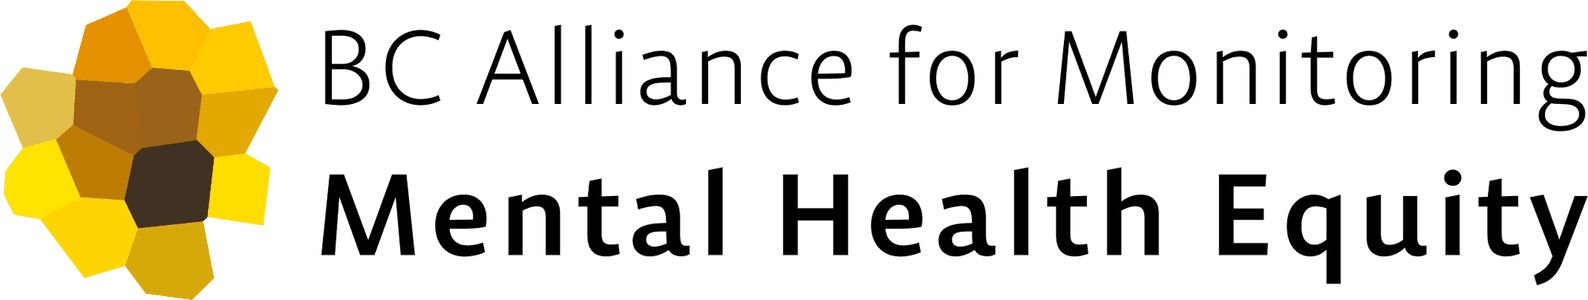 BC Alliance for Monitoring Mental Health Equity